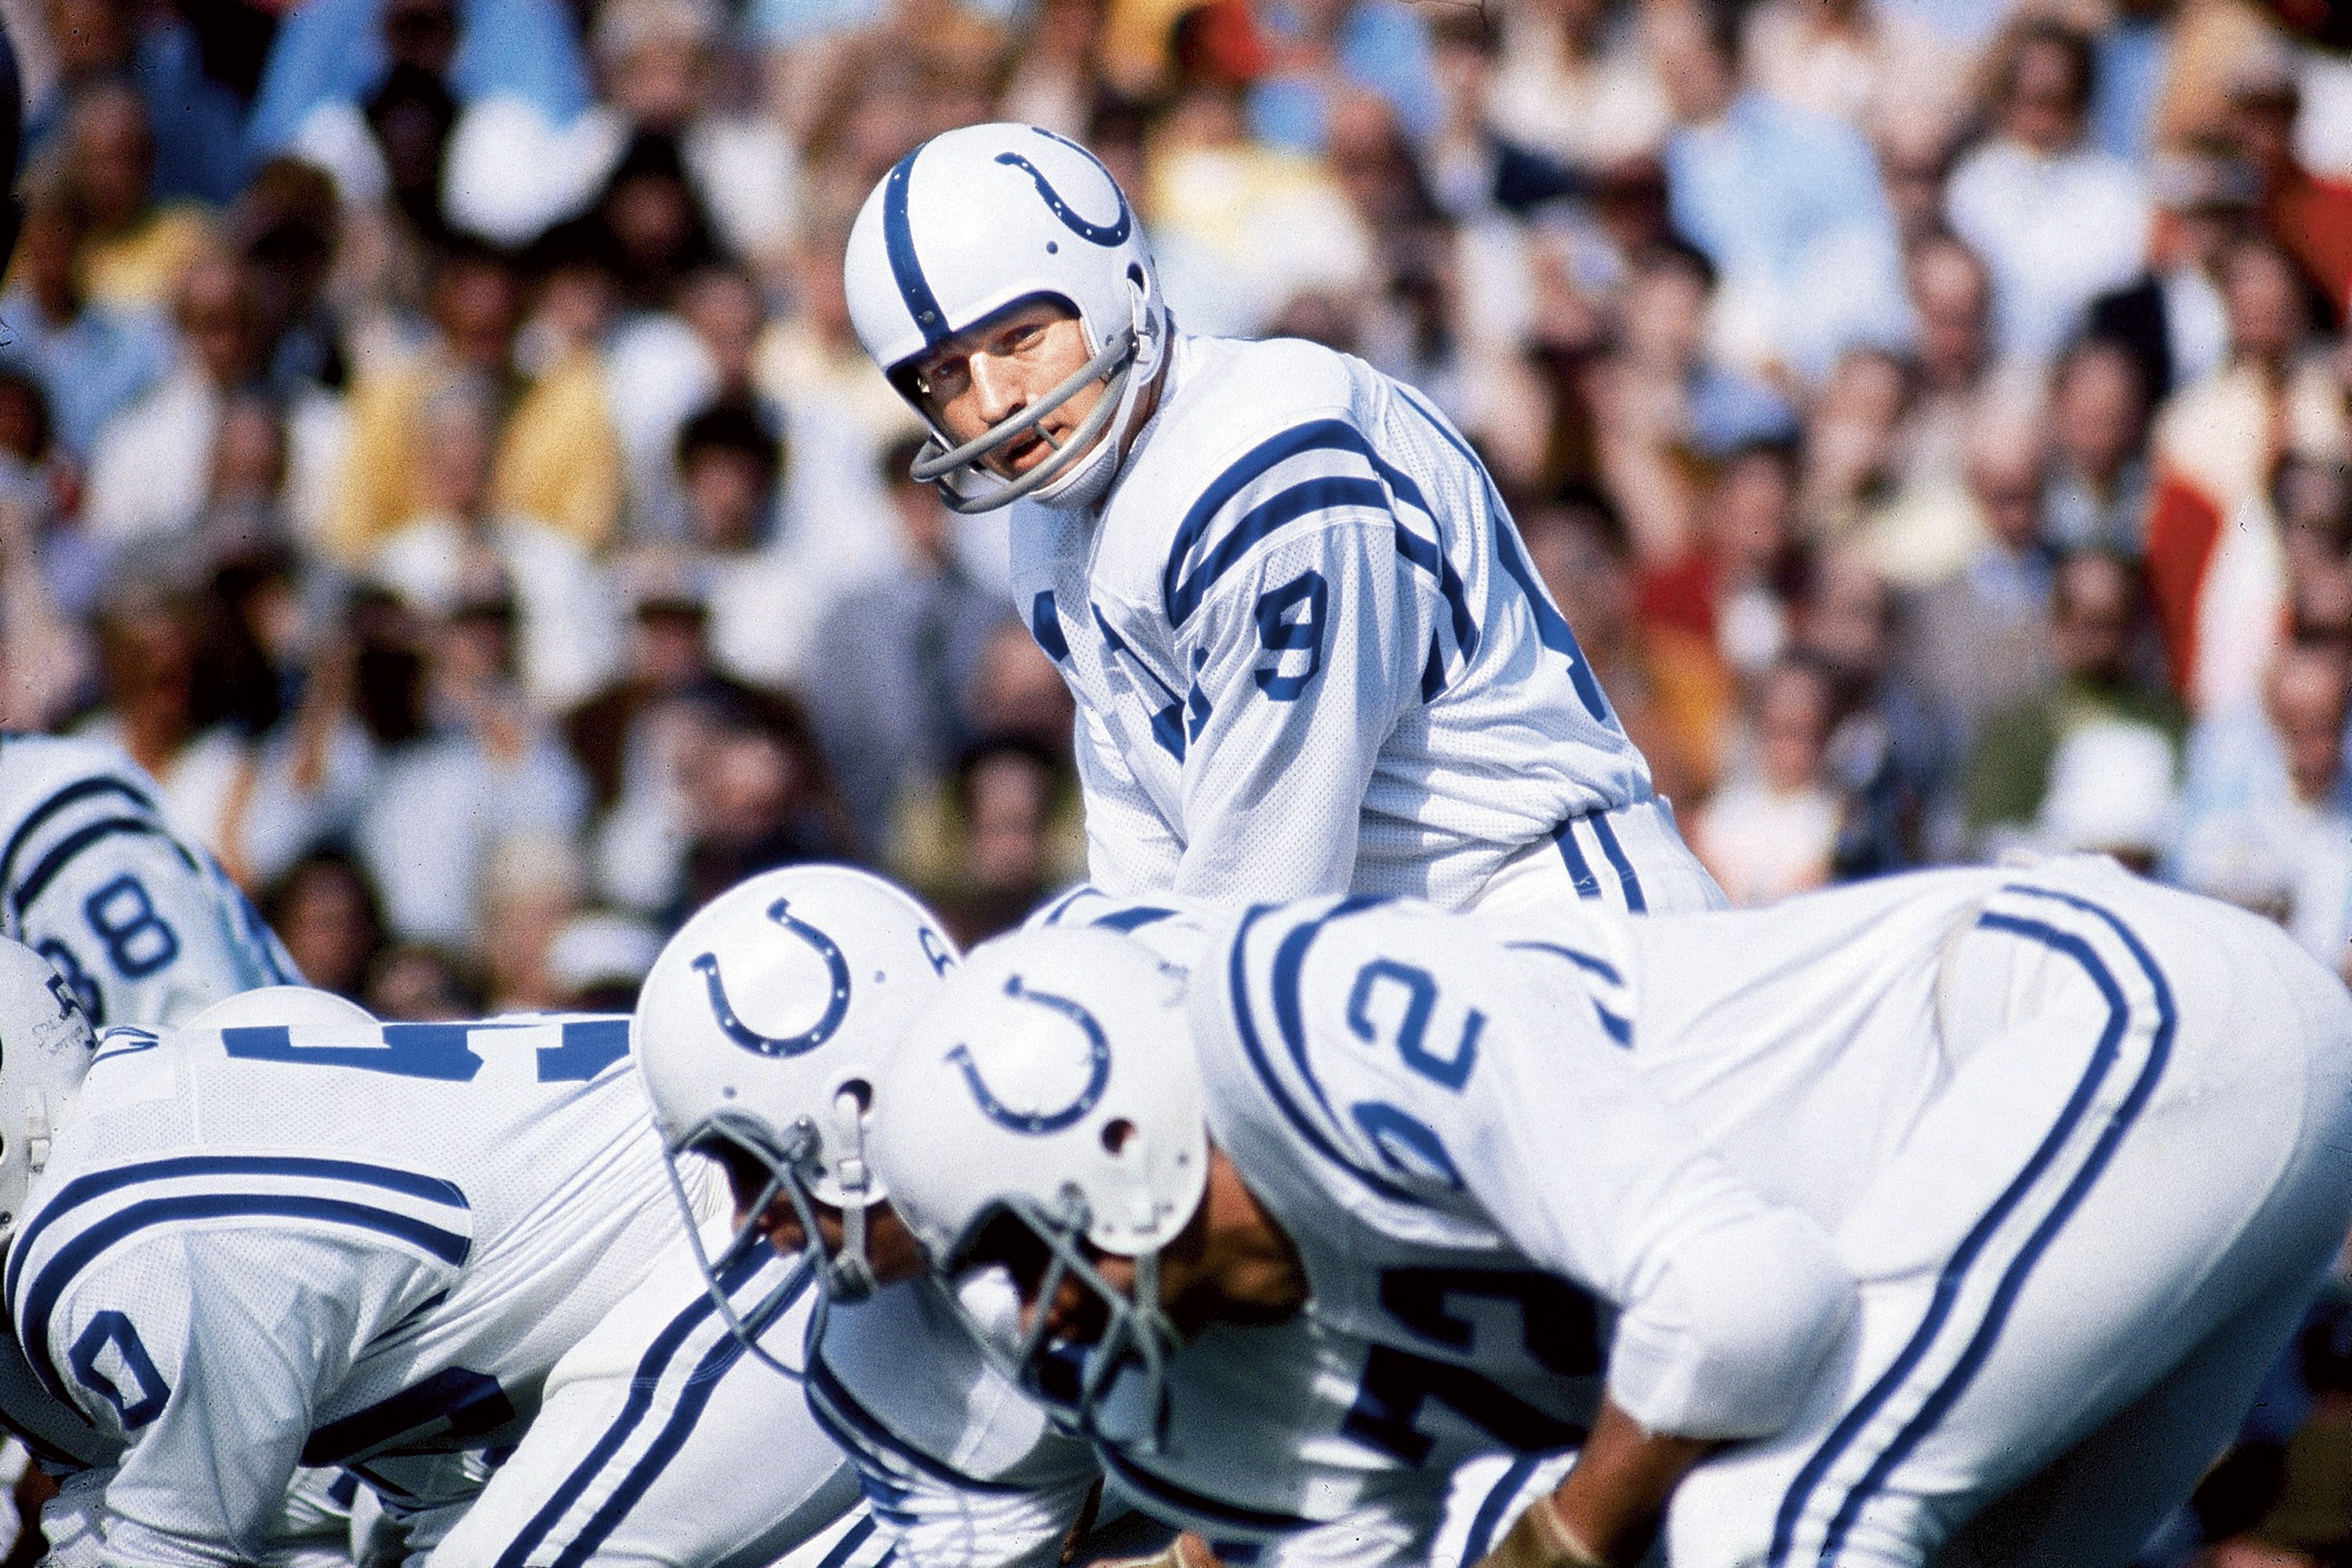 UNITED STATES - JANUARY 17: Football: Super Bowl V, Baltimore Colts QB Johnny Unitas (19) at line of scrimmage before snap during game vs Dallas Cowboys, Miami, FL 1/17/1971 (Photo by Walter Iooss Jr./Sports Illustrated/Getty Images) (SetNumber: X15535)